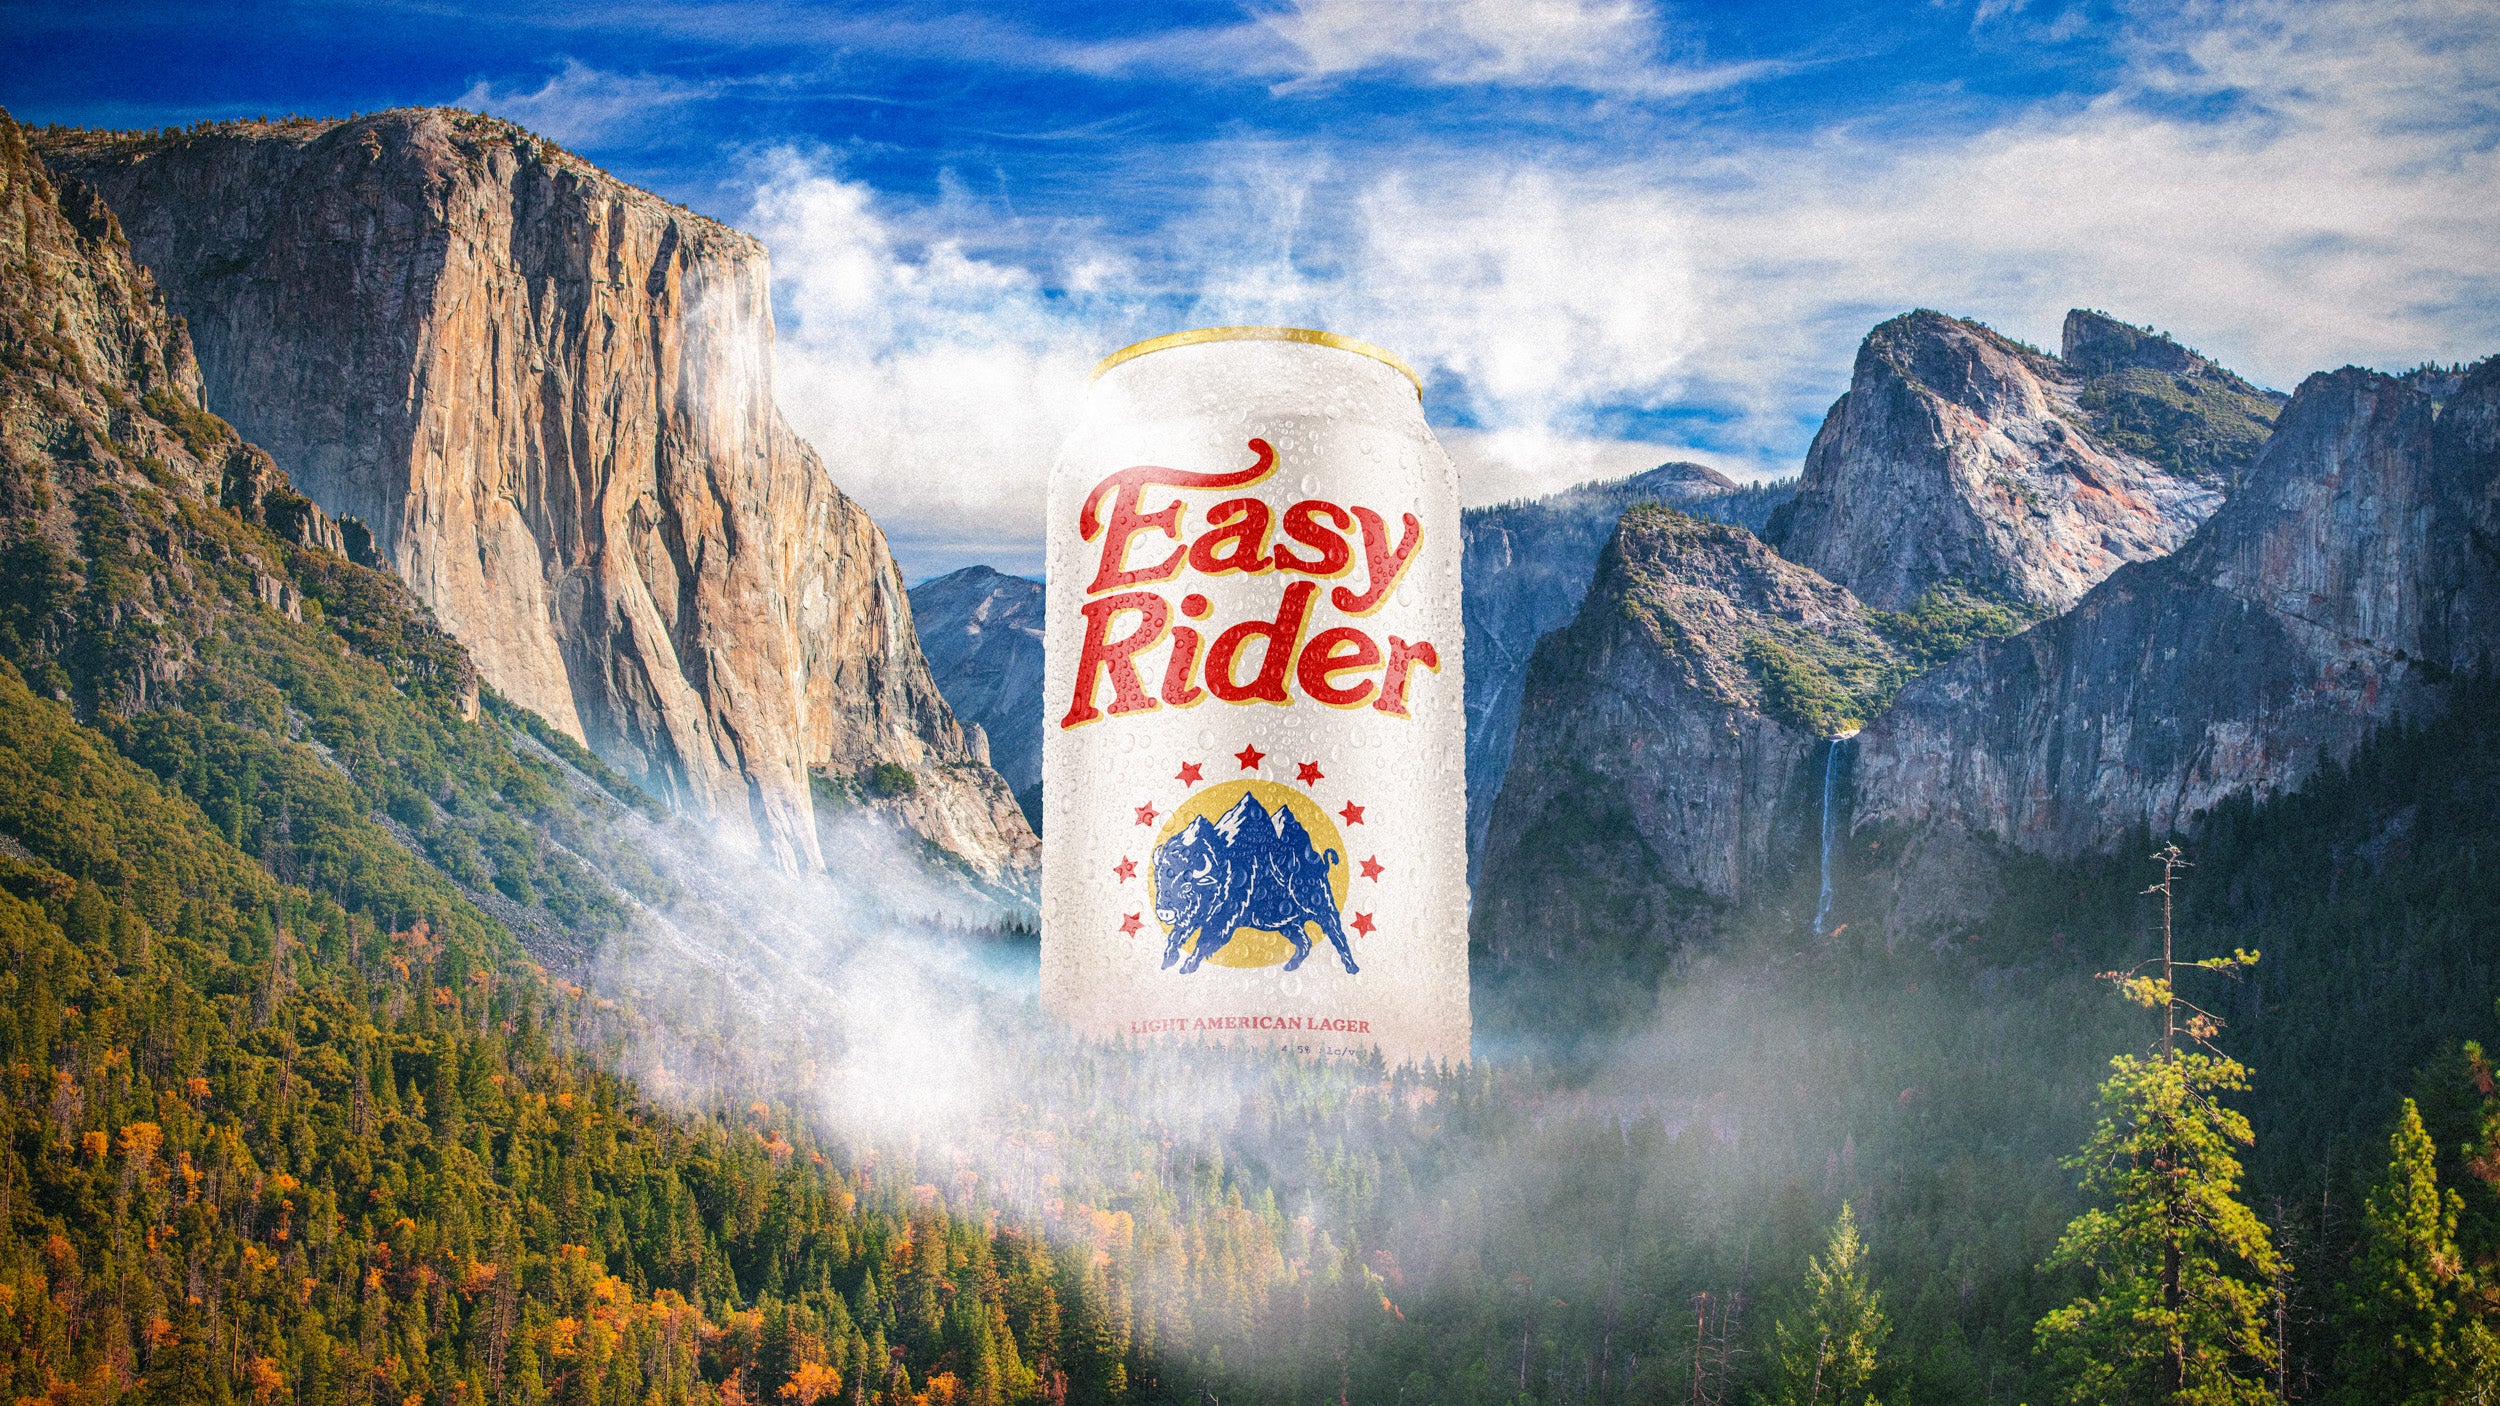 An illustrative giant can of Easy Rider beer in Yosemite Valley